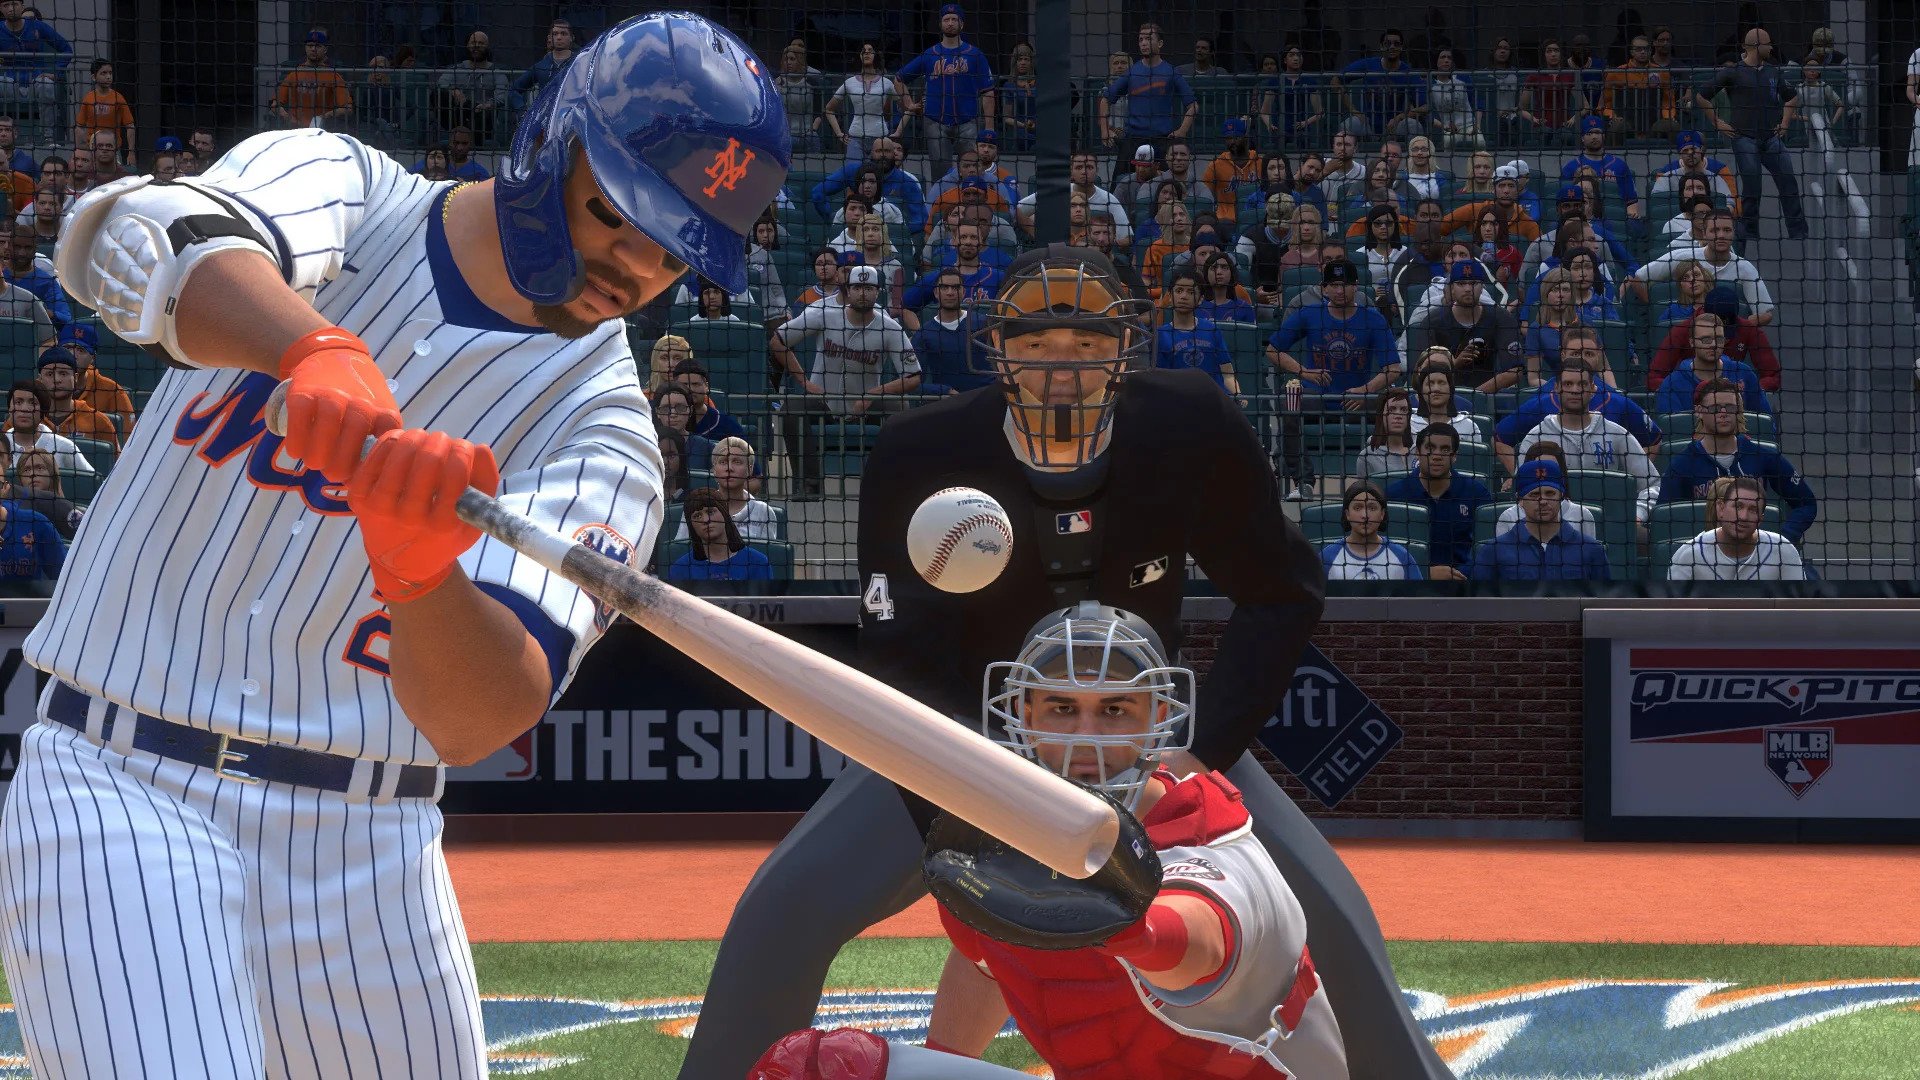 MLB The Show 22 Update 1.09 Hits Out for Update 9 This June 23